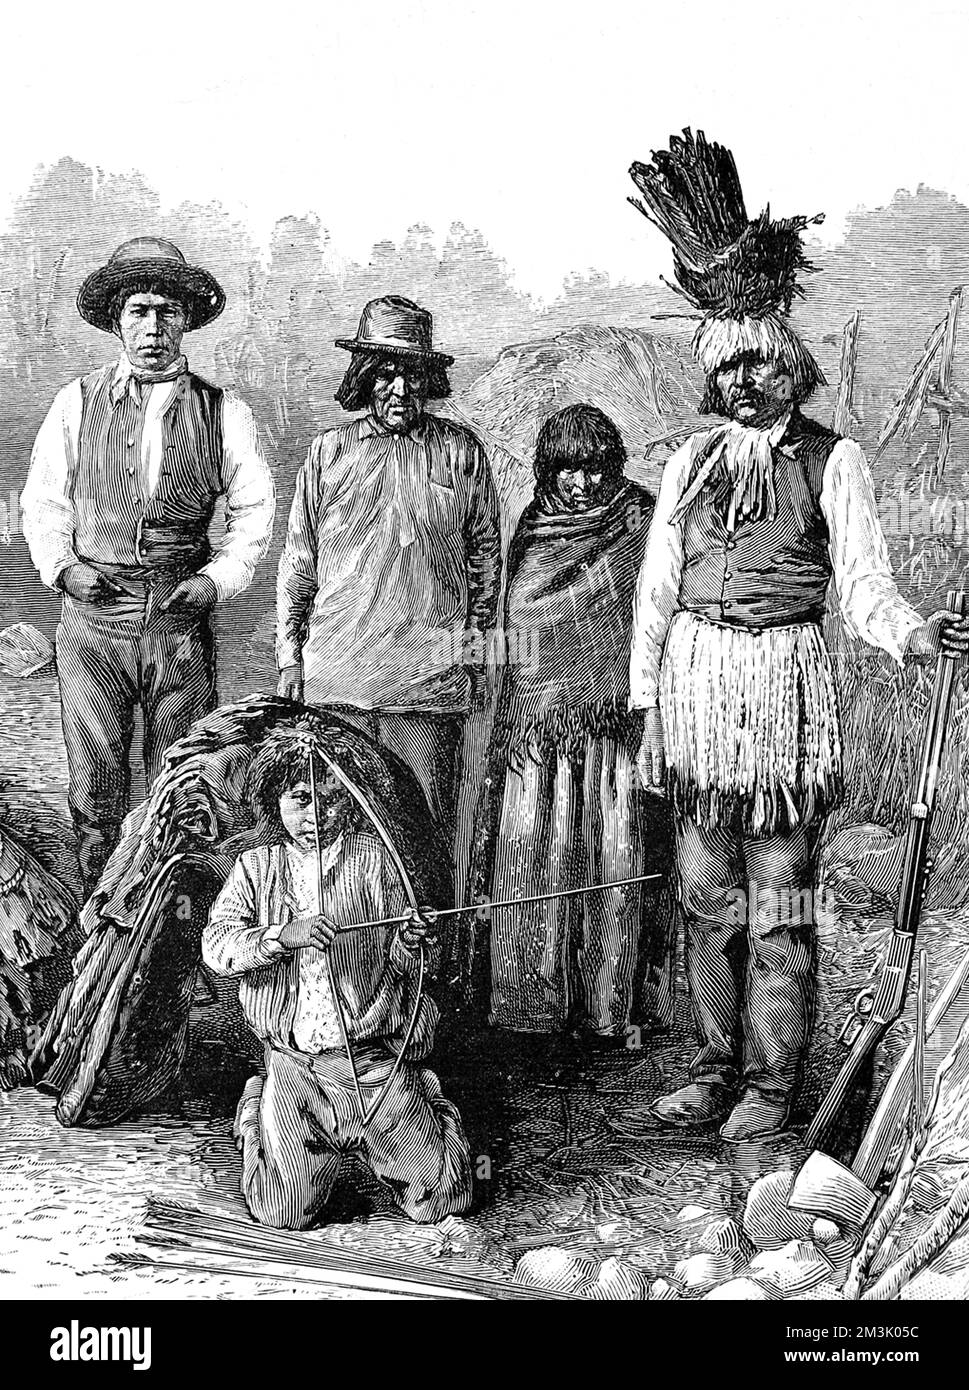 Group of American Indians in a mixture of traditional and European dress, boy in foreground  holding a bow and arrow, on the right the Chief in feathered head dress holding a rifle. Many Indian tribles were banding together under Sioux Chief Sitting Bull to fight against being forced into reservations.     Date: 1890 Stock Photo